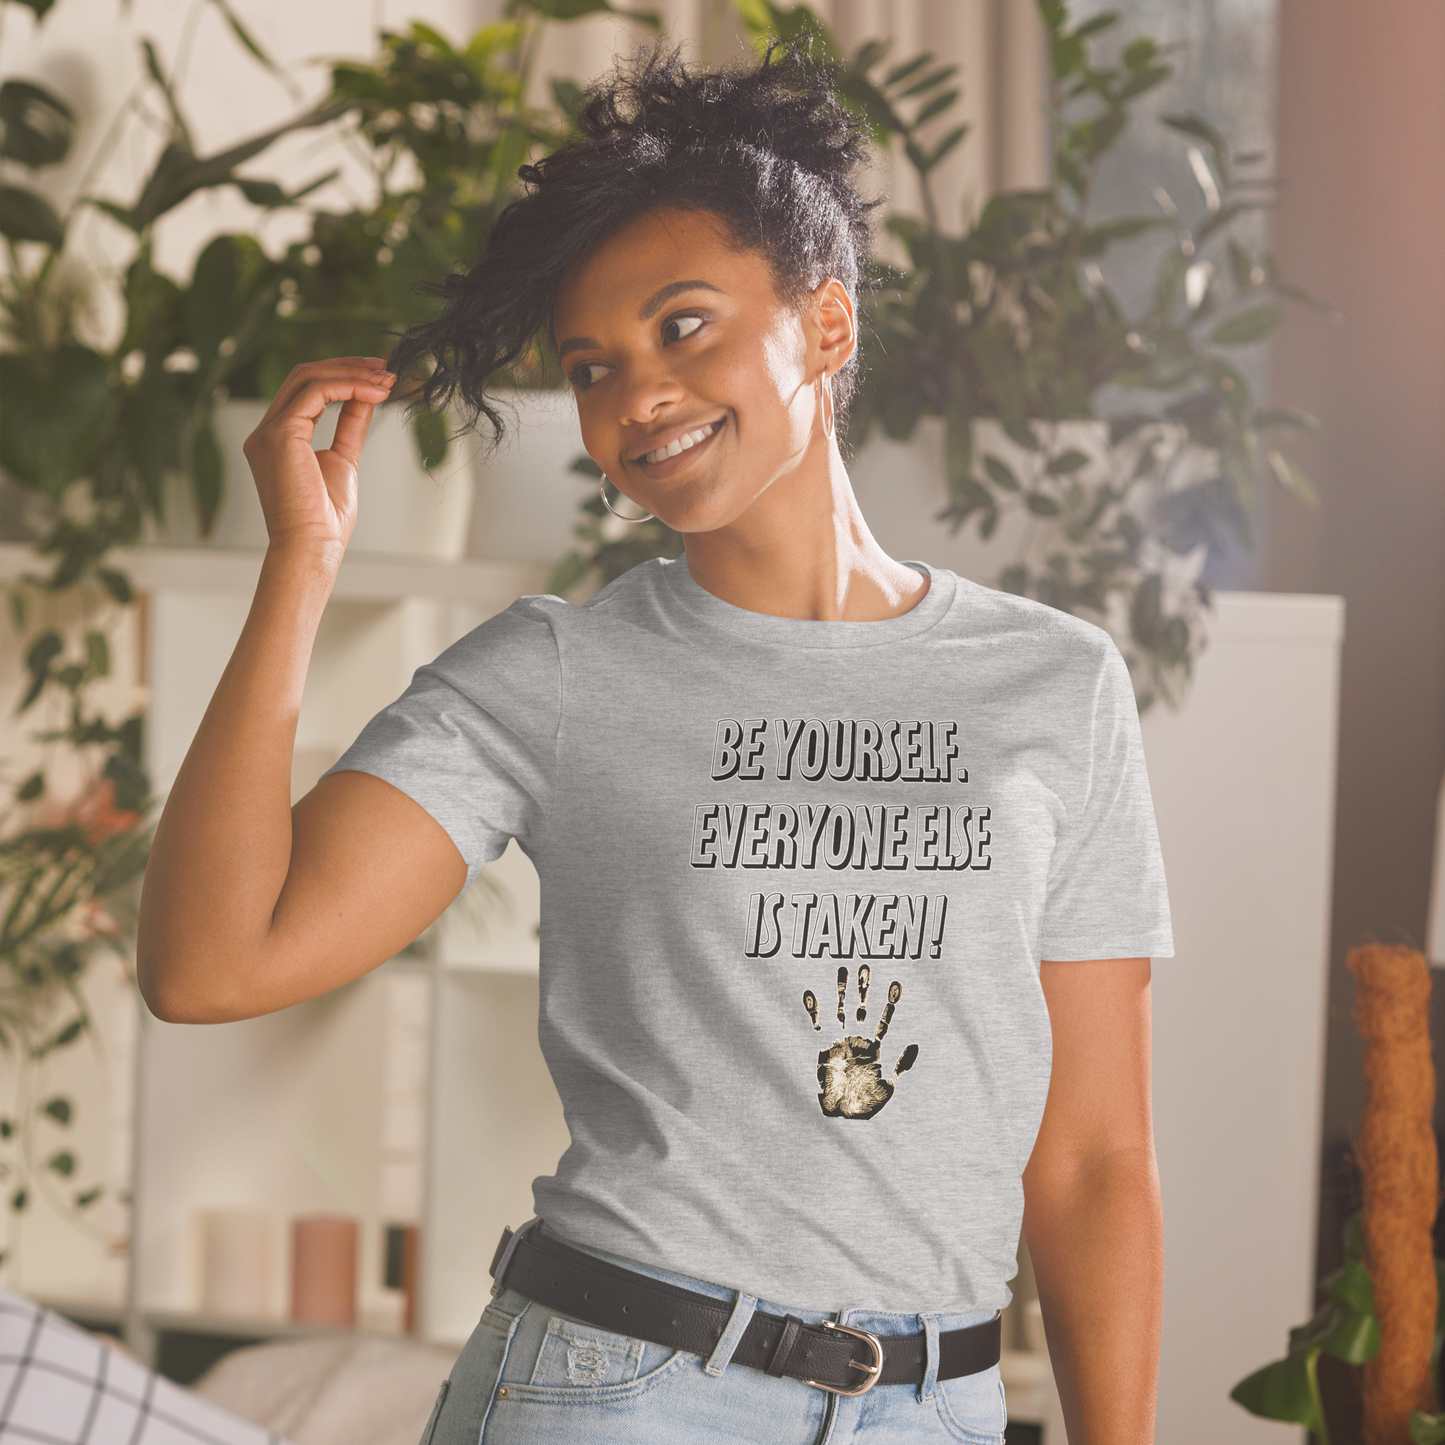 Be Yourself T-Shirt